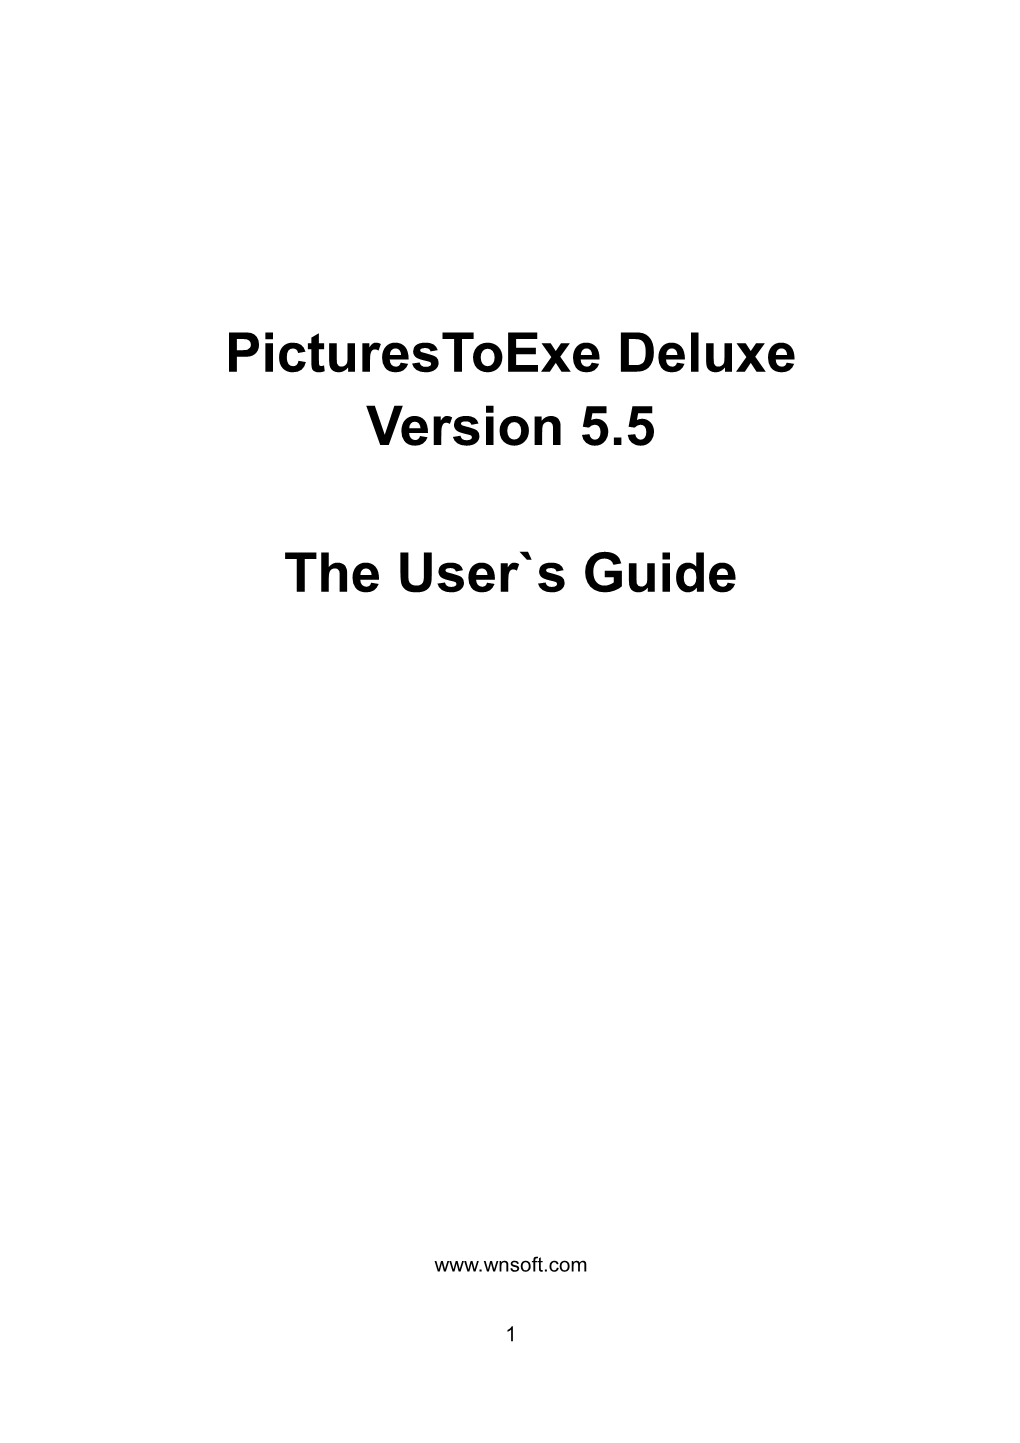 Picturestoexe Deluxe Version 5.5 the User`S Guide